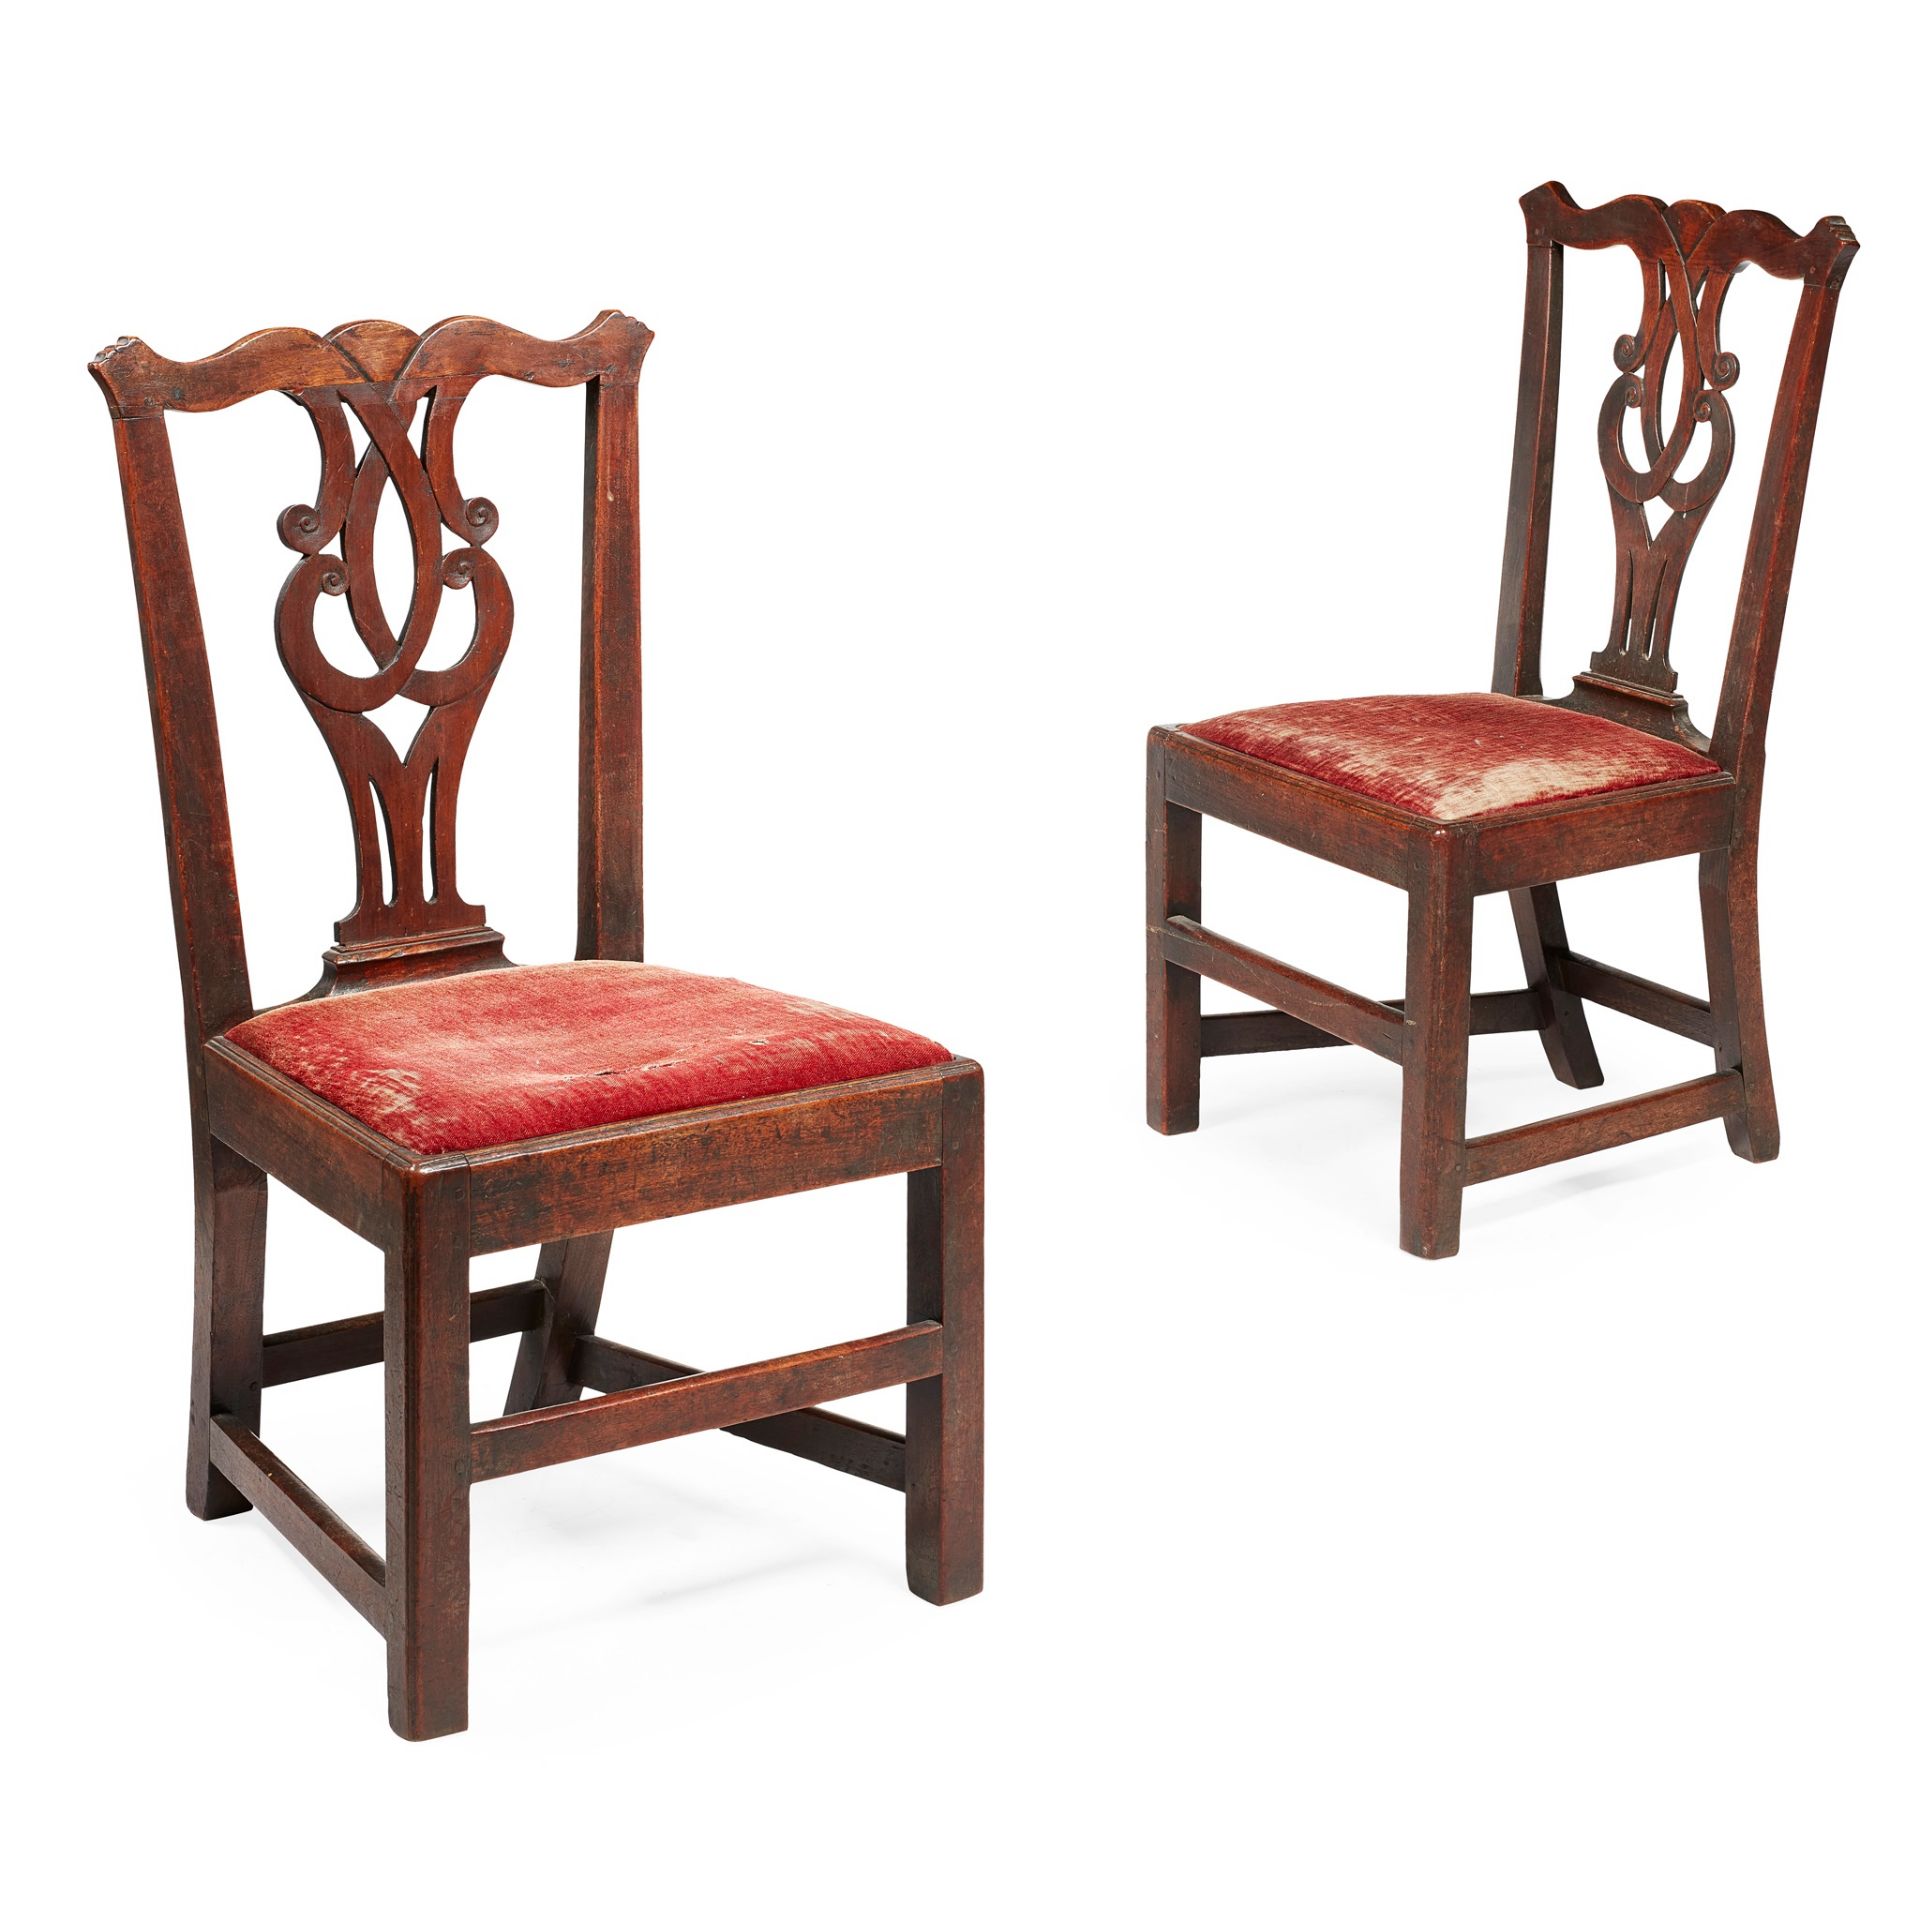 PAIR OF GEORGE III MAHOGANY DINING CHAIRS LATE 18TH CENTURY